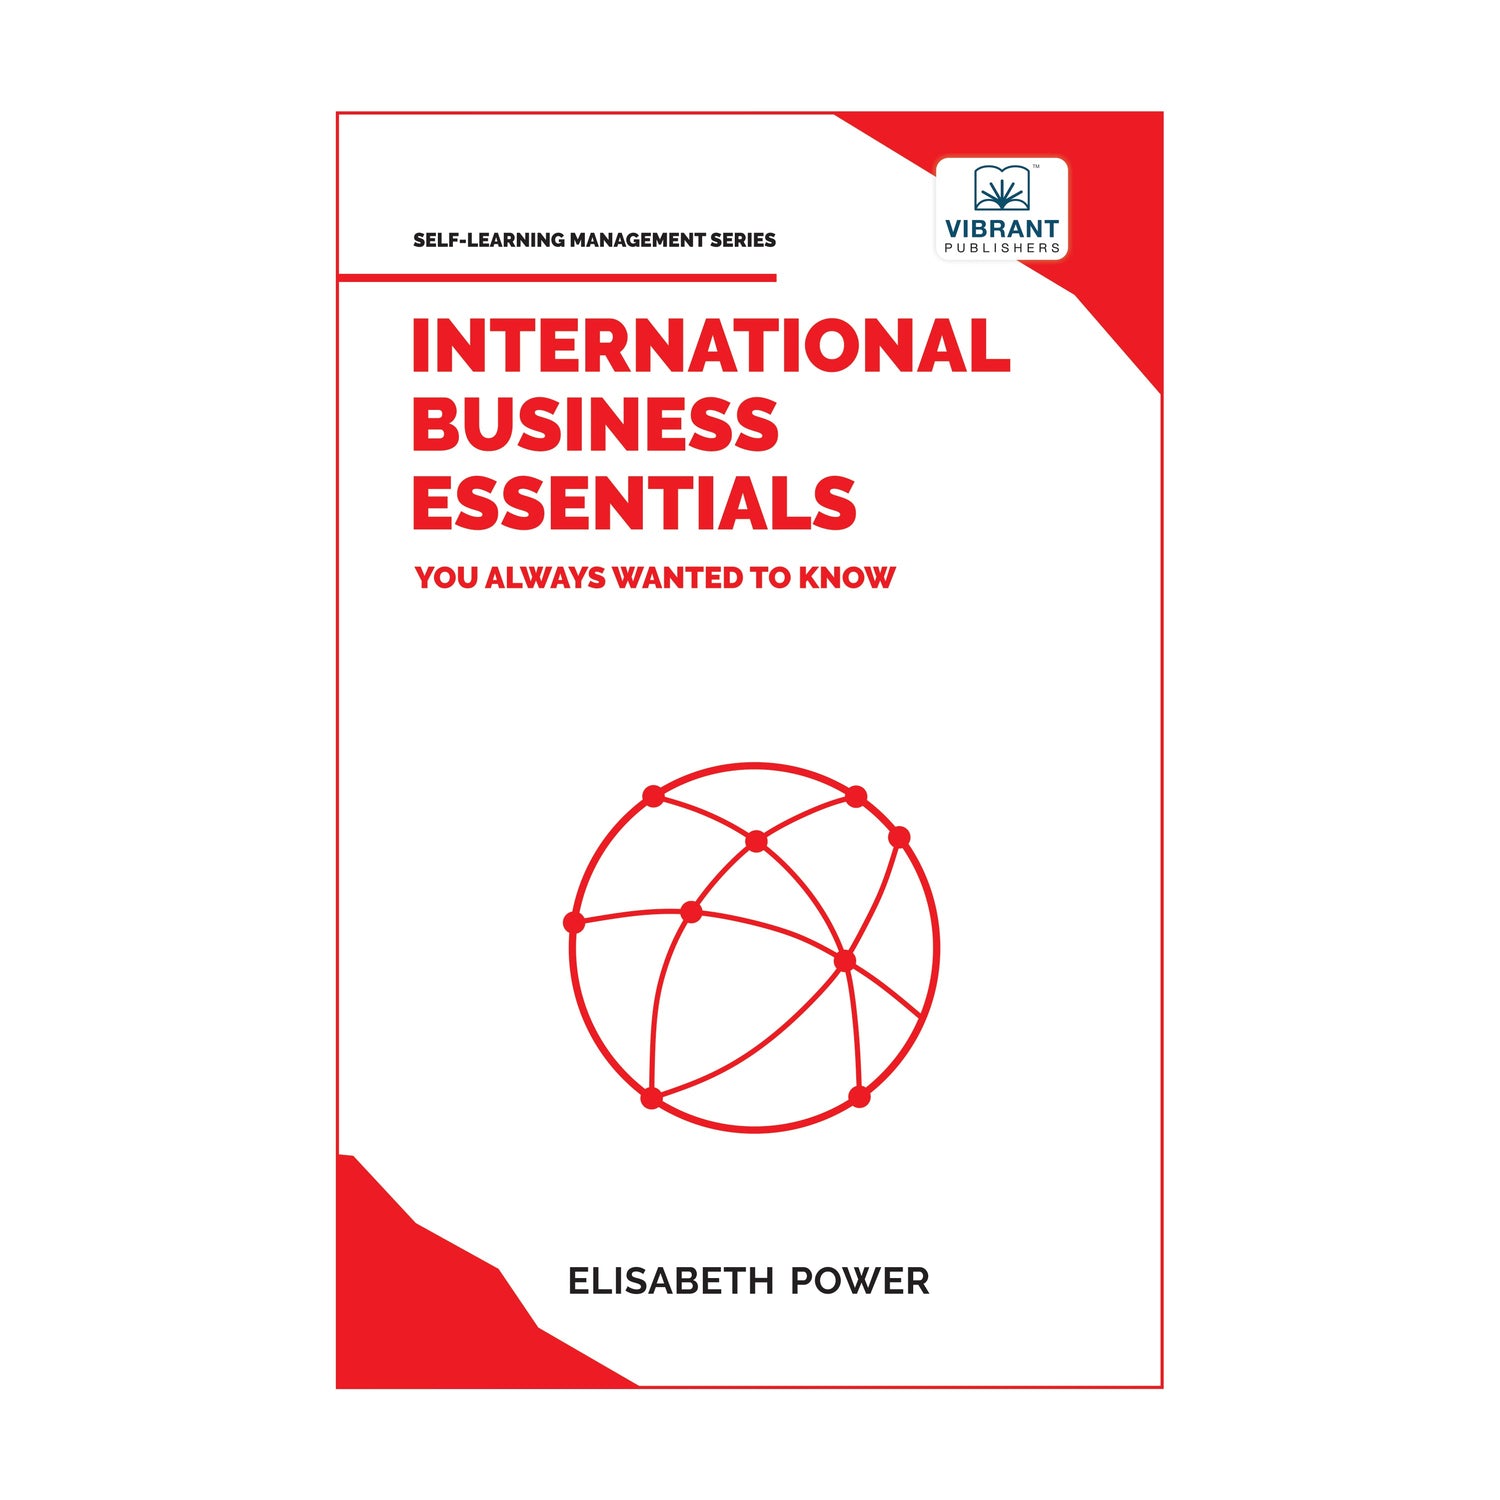 International Business Essentials You Always Wanted To Know